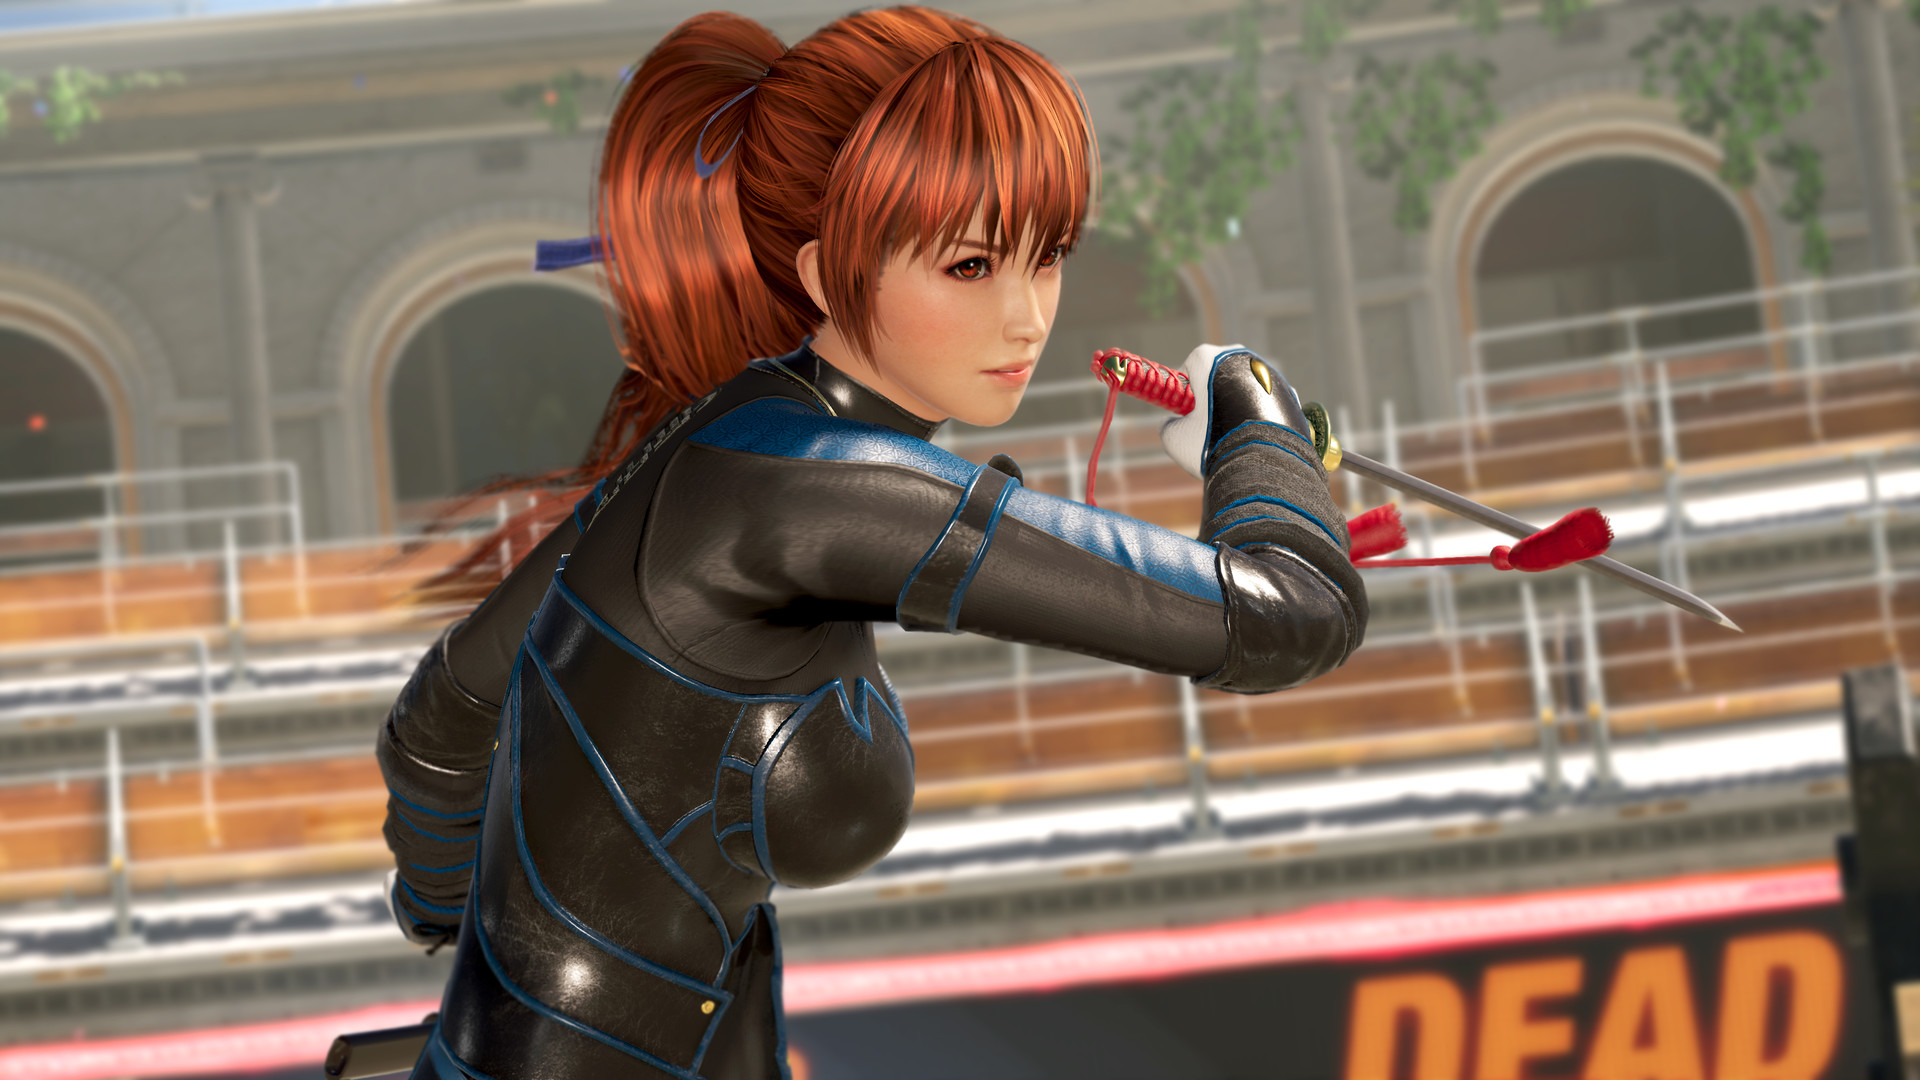 DEAD OR ALIVE 6 on Steam